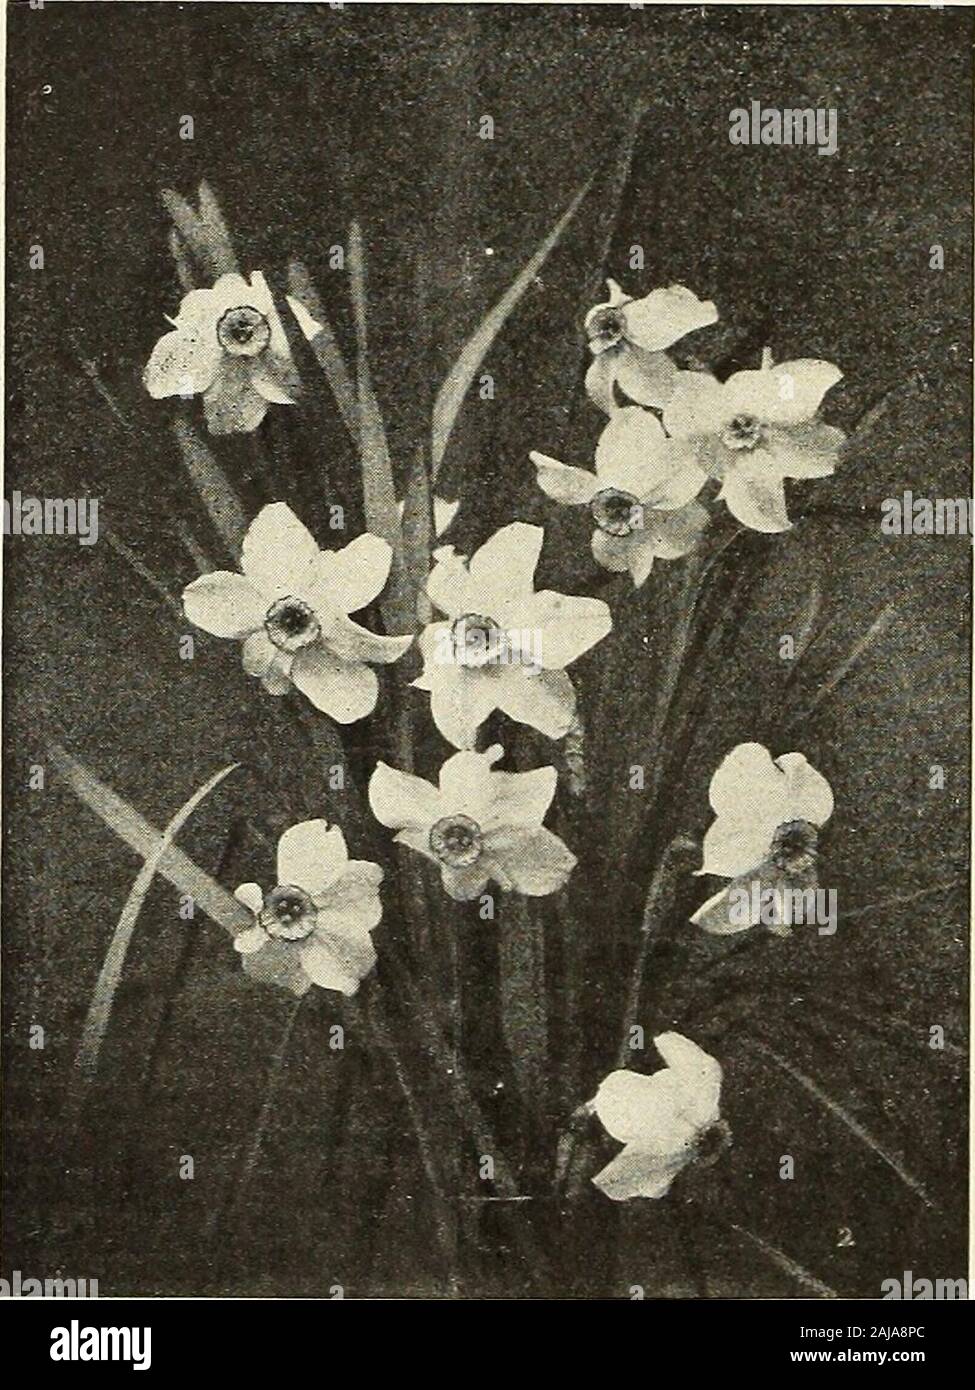 Vaughan's special import bulb prices . BICOLOR HORSFILLDI. Polyanthus Varieties (BUNCH=FLOWERED NARCISSUS.) Paperwhite, Totus Albus, first size. Per 100, 90c; per 1000, $6.75.Early Double Roman, lemon and yellow. Per 100, $1.00; per 1000 $7.00. Grand Monarque, white, citron cup Per 100, $1.85; per 1000, $16.7.1.Staten General, white. Per 100, $1.65; per 1000, $14.75.Grand Soleil dOr, yellow, orange cup. Per 100, $1.65; per 1000, $14.75.Gloriosus, white, orange cup. Per 100, $1.70; per 1C00, $15.50.Grand Primo, white. Per 100, $1.75; per 1000, $15.50.Yellow Mixed. Per 100, $1.25; per 1000, $10. Stock Photo